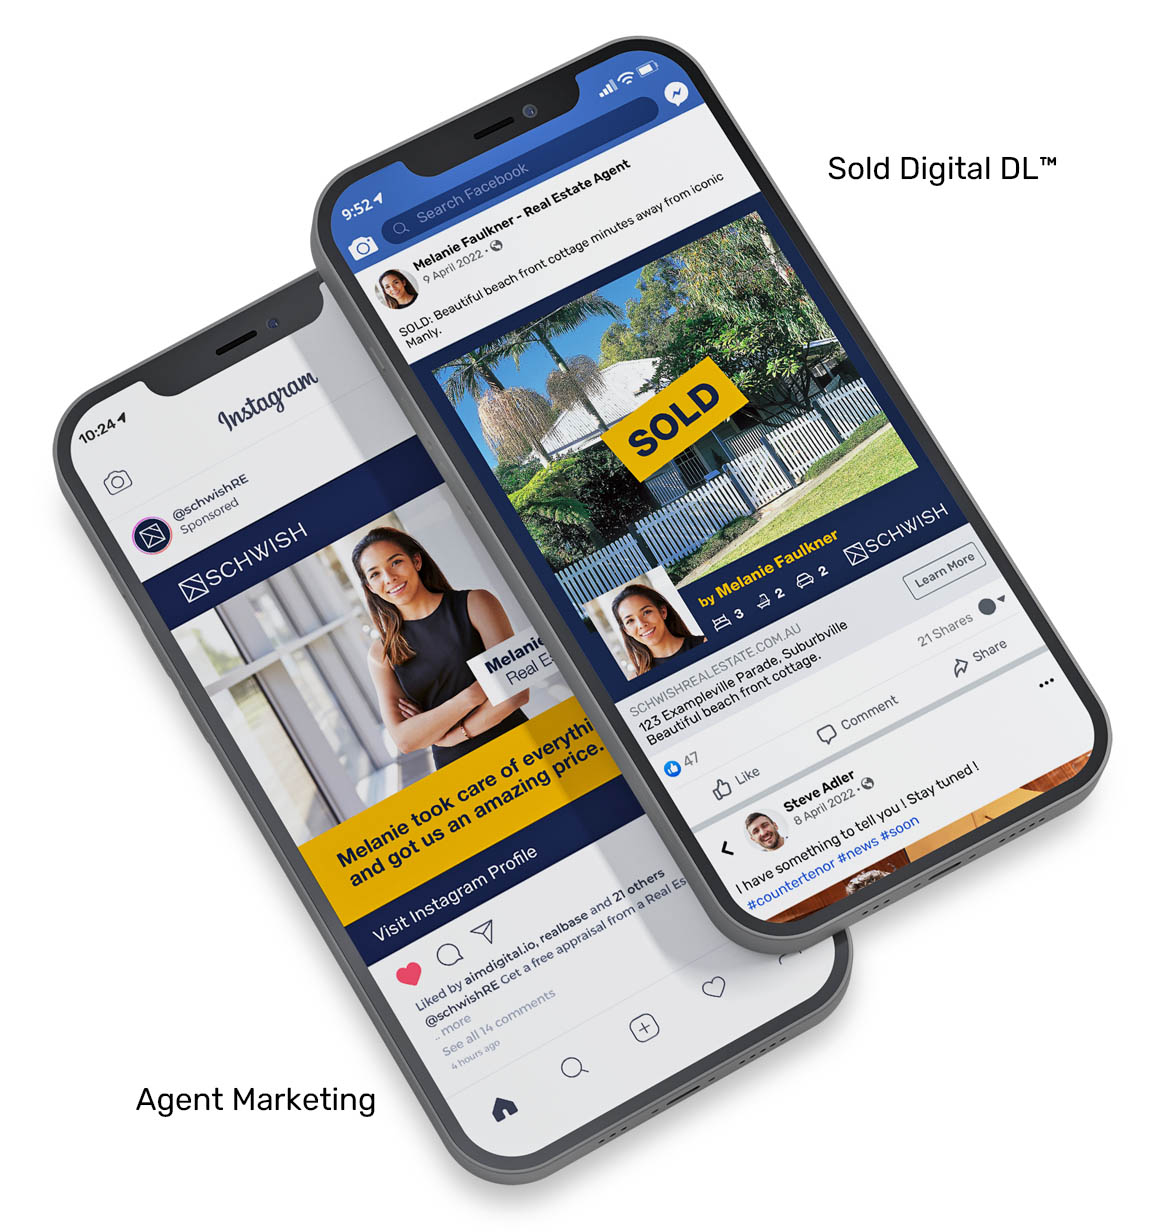 AIM-agent-digital-marketing-packages-and-SOLD-Digital-ads-mobile-phone